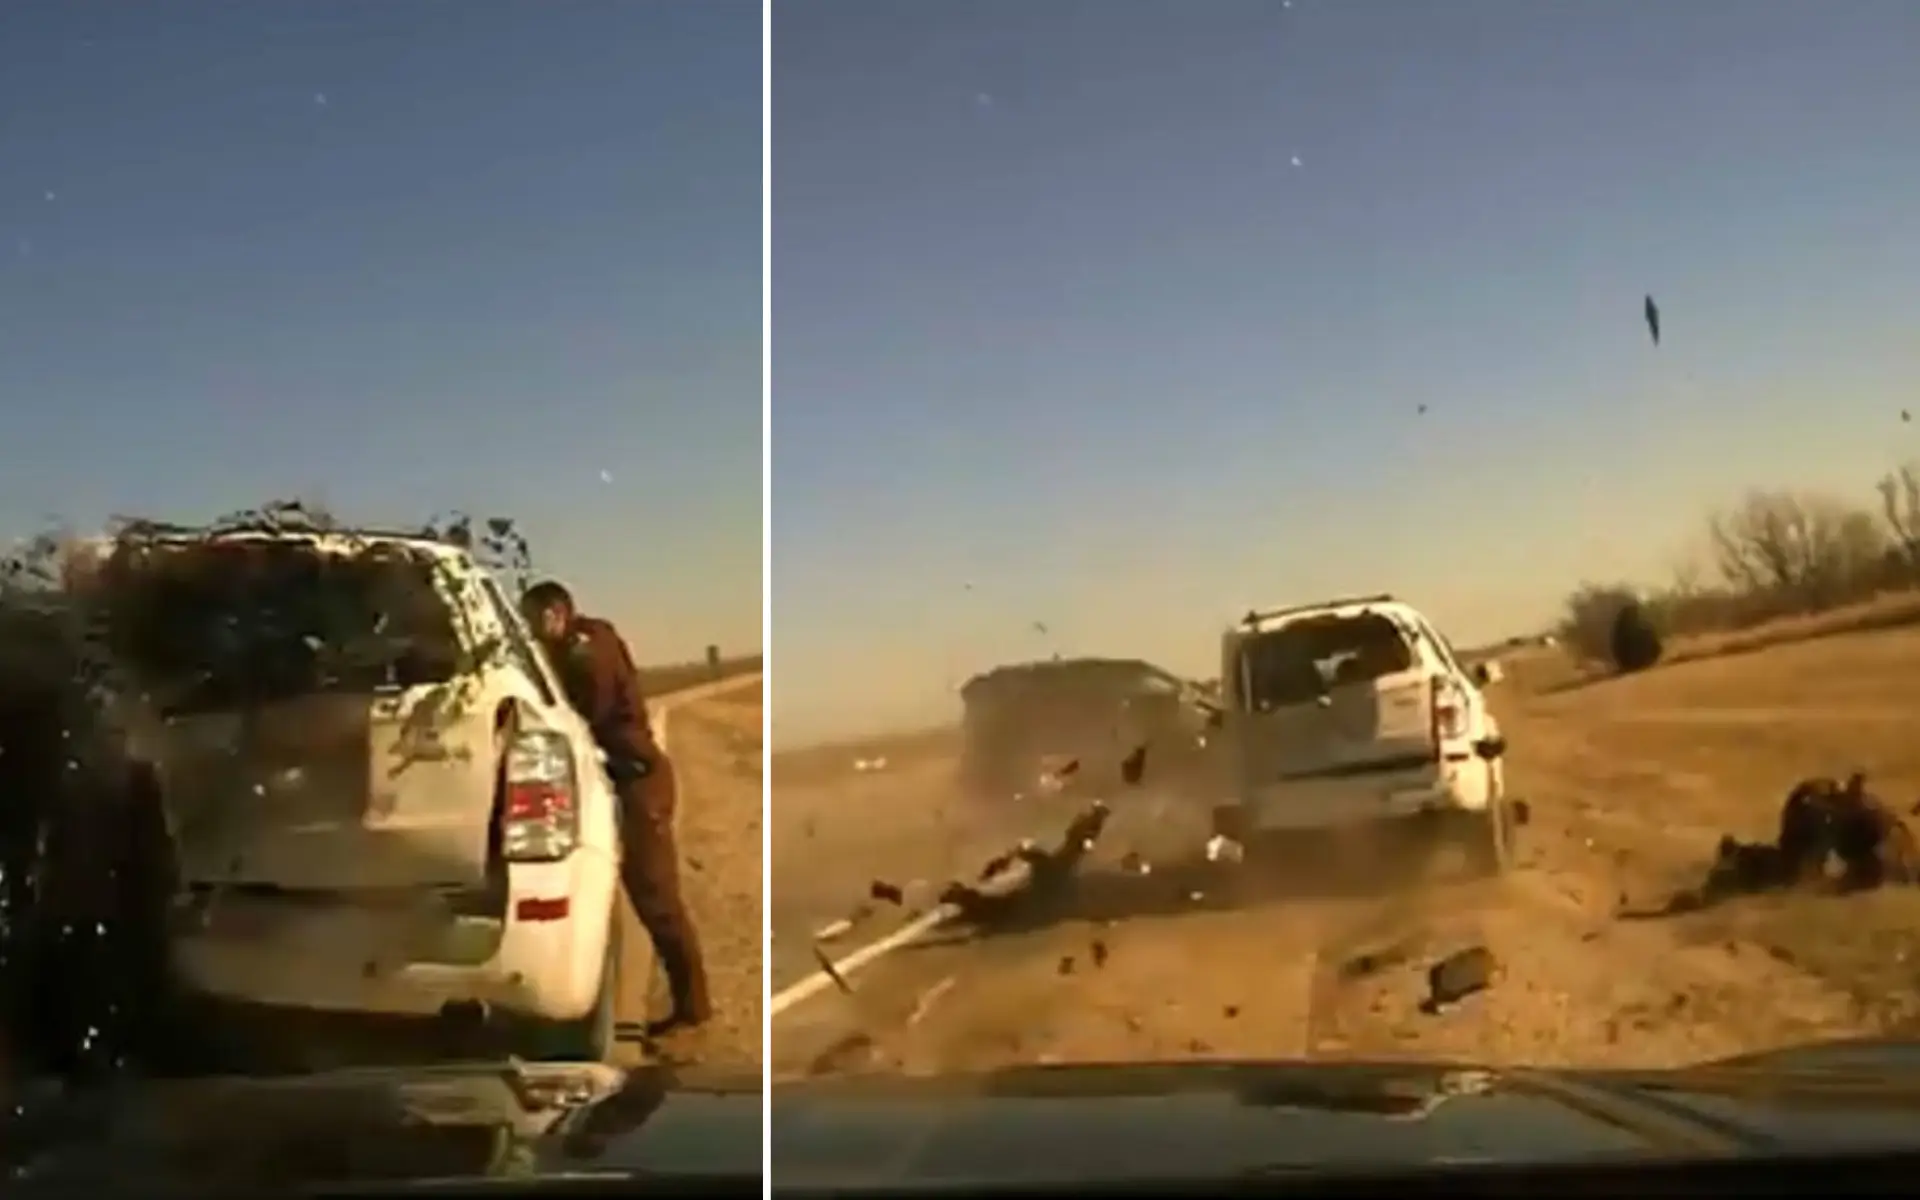 Oklahoma Highway Patrol Officer Narrowly Escapes Serious Injury In Dramatic Traffic Stop Crash